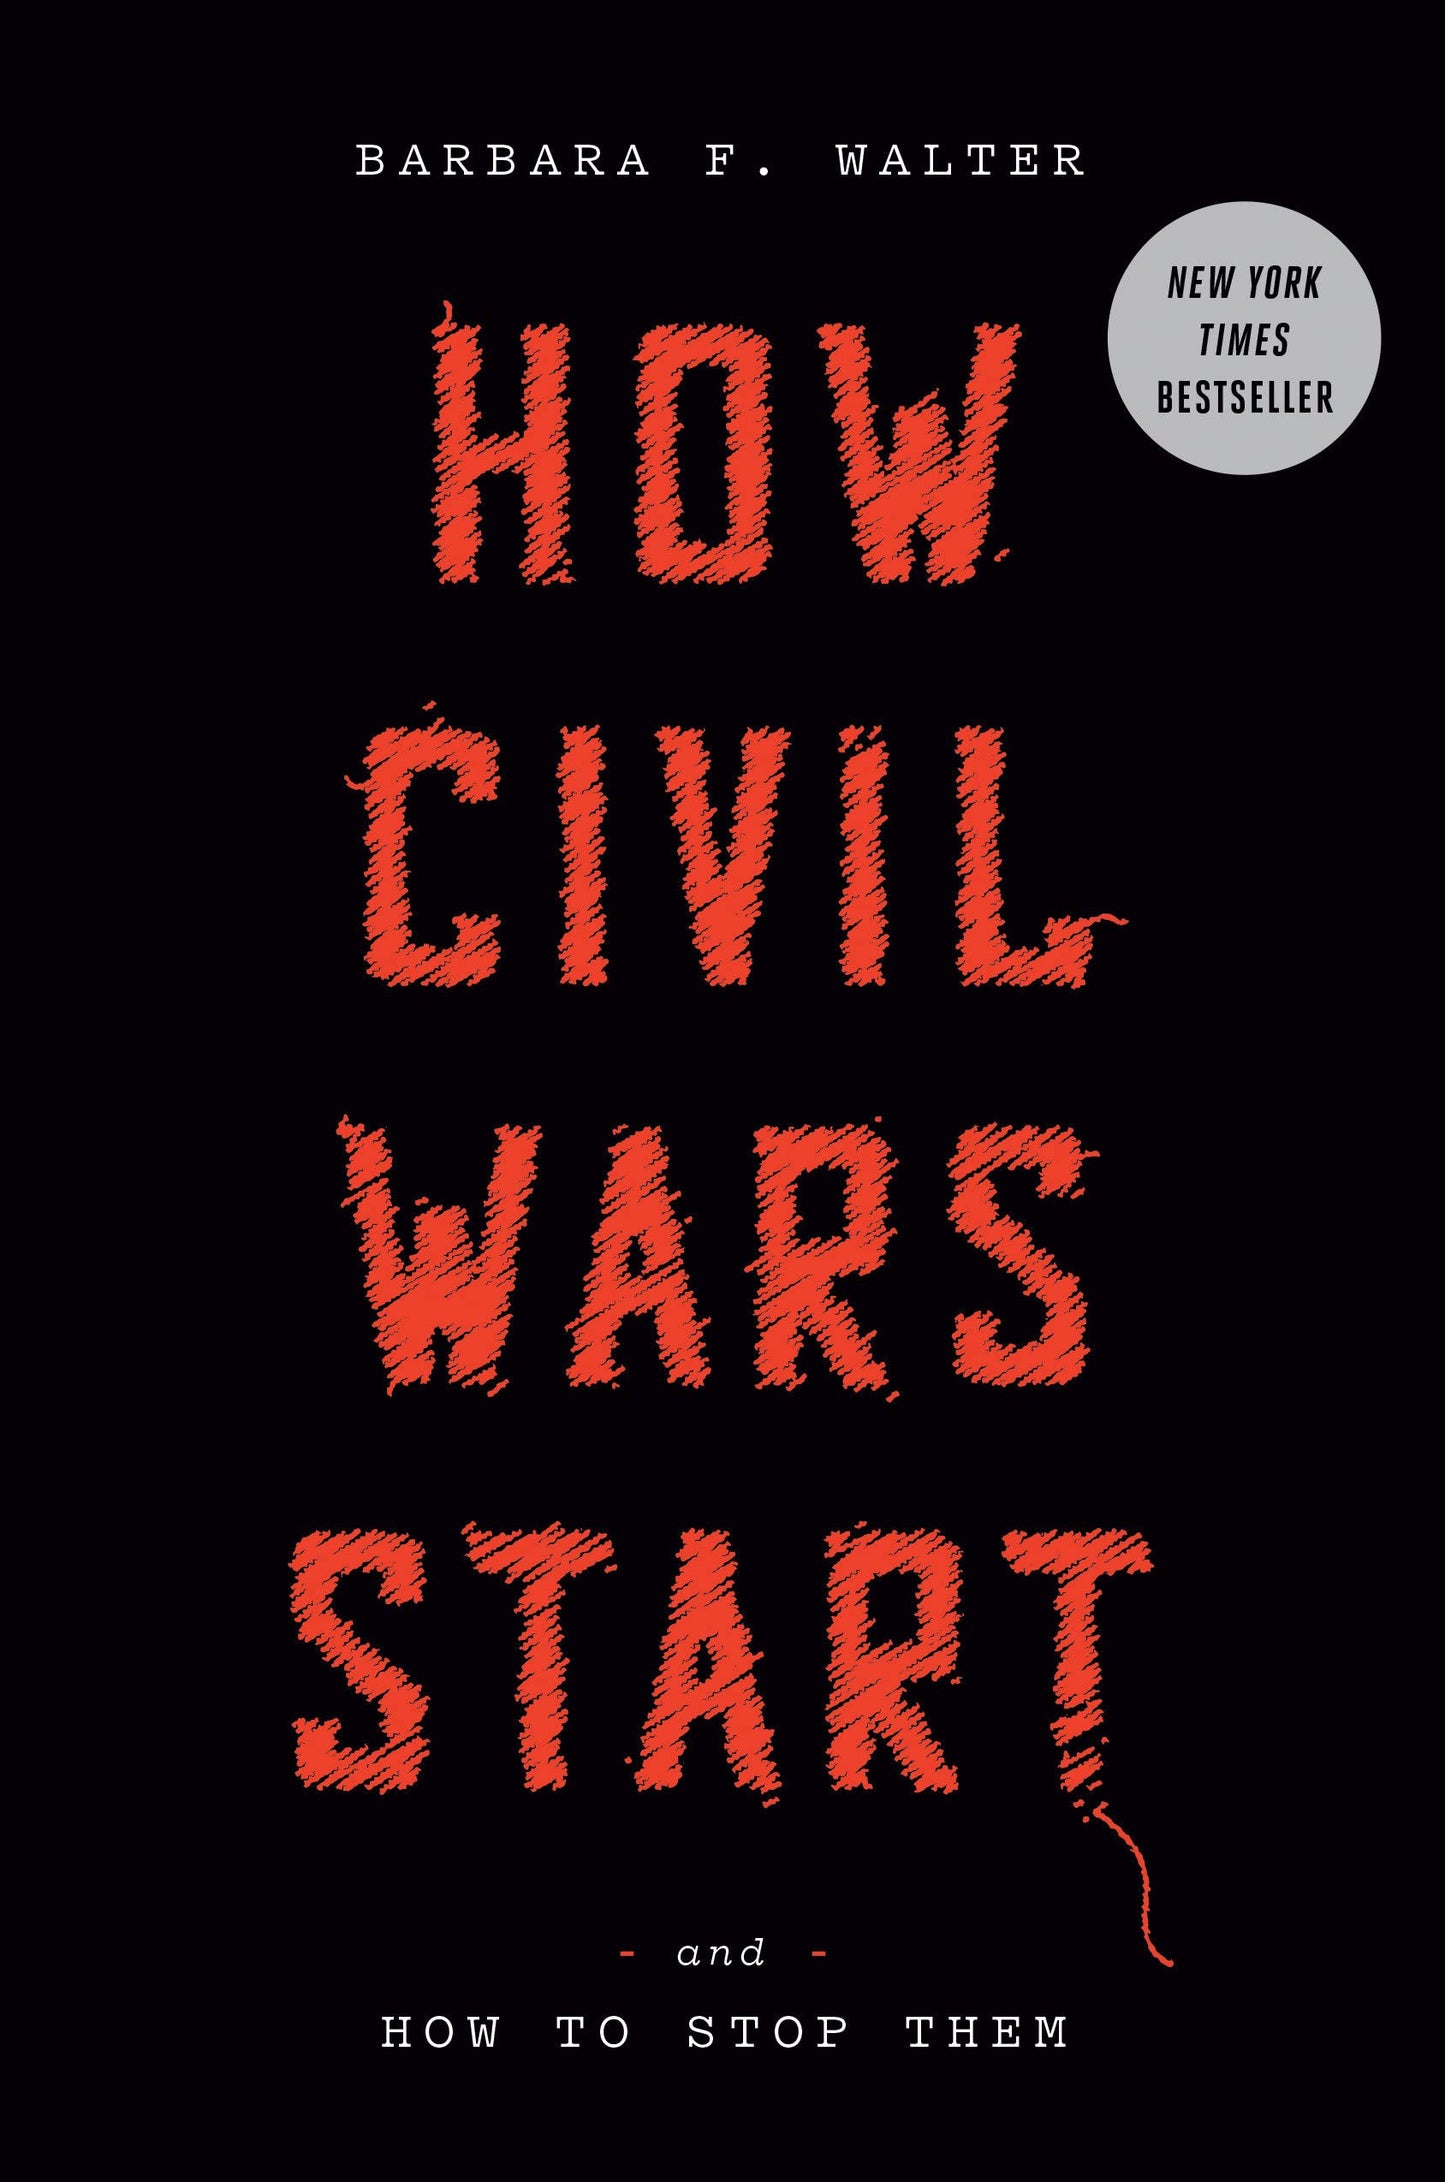 How Civil Wars Start (and How to Stop Them), by Barbara F. Walter